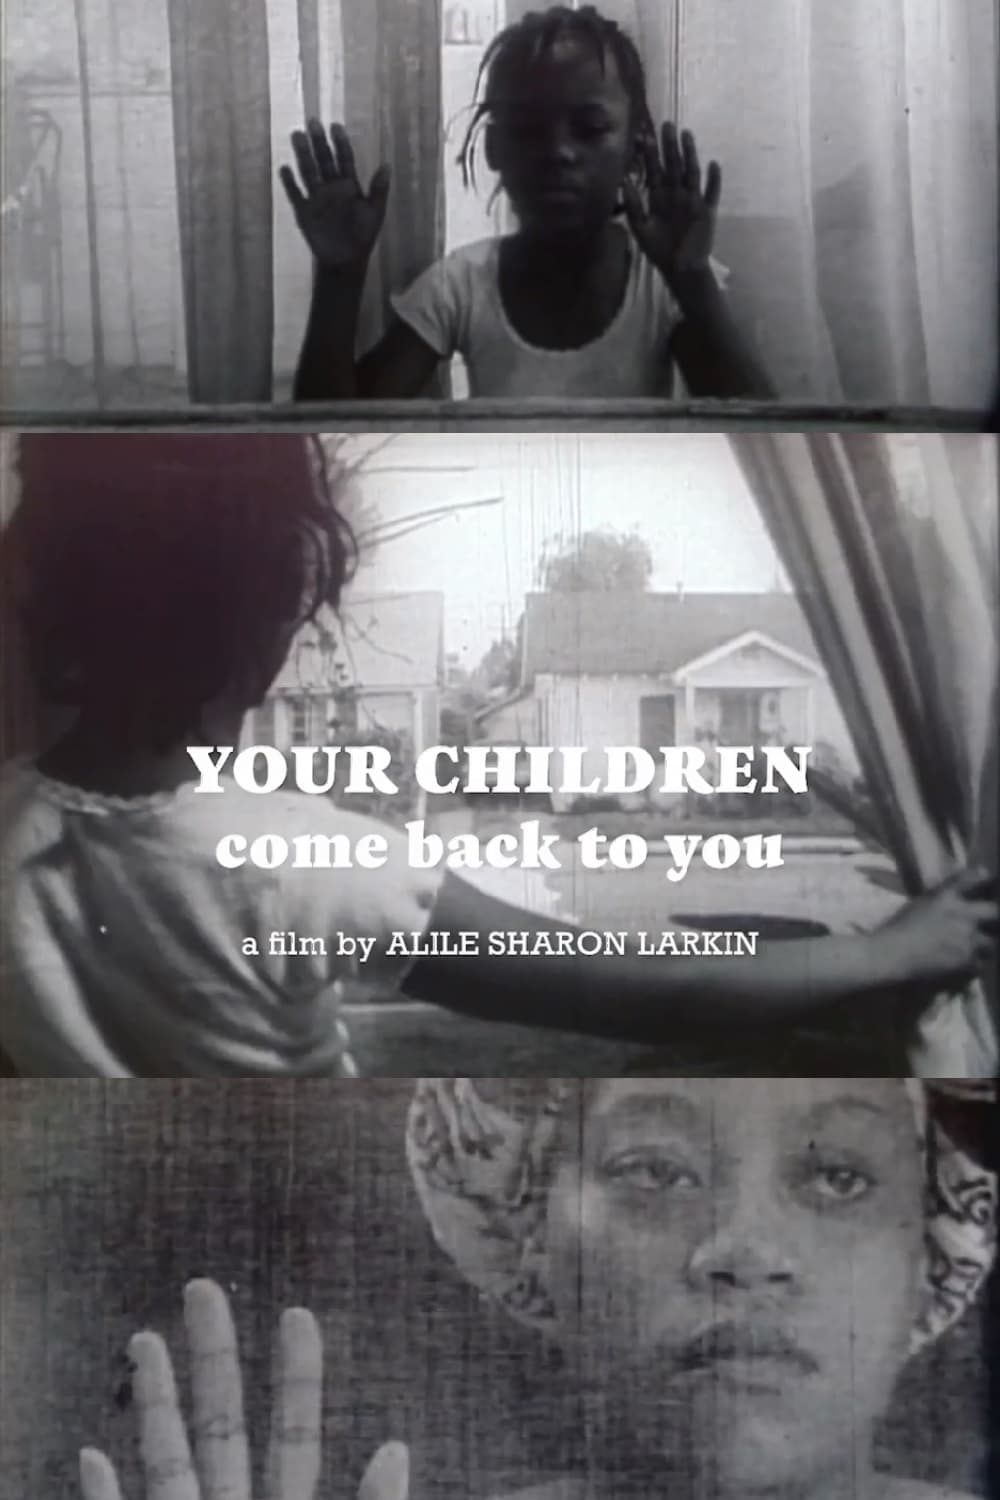 Your Children Come Back to You (1979)